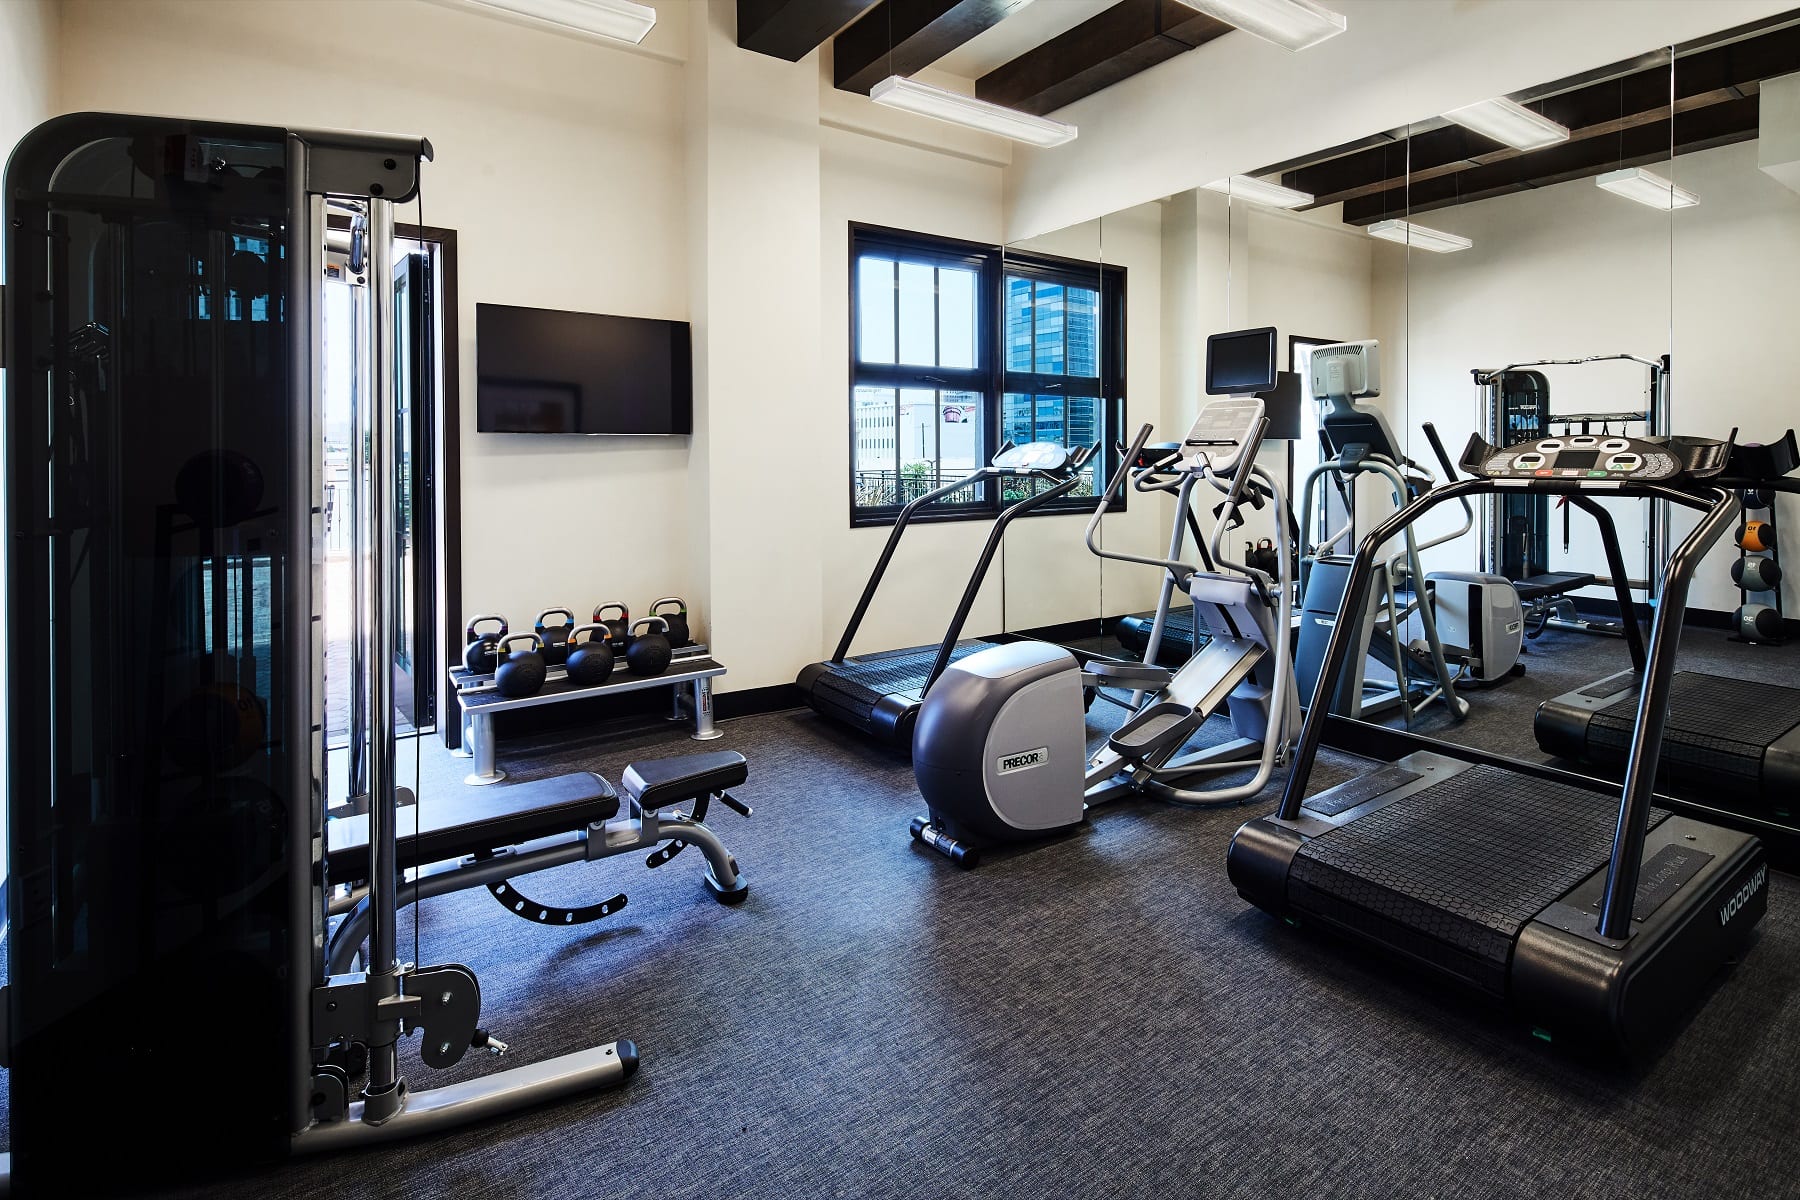 exercise room with treadmill, stationary bikes and weights